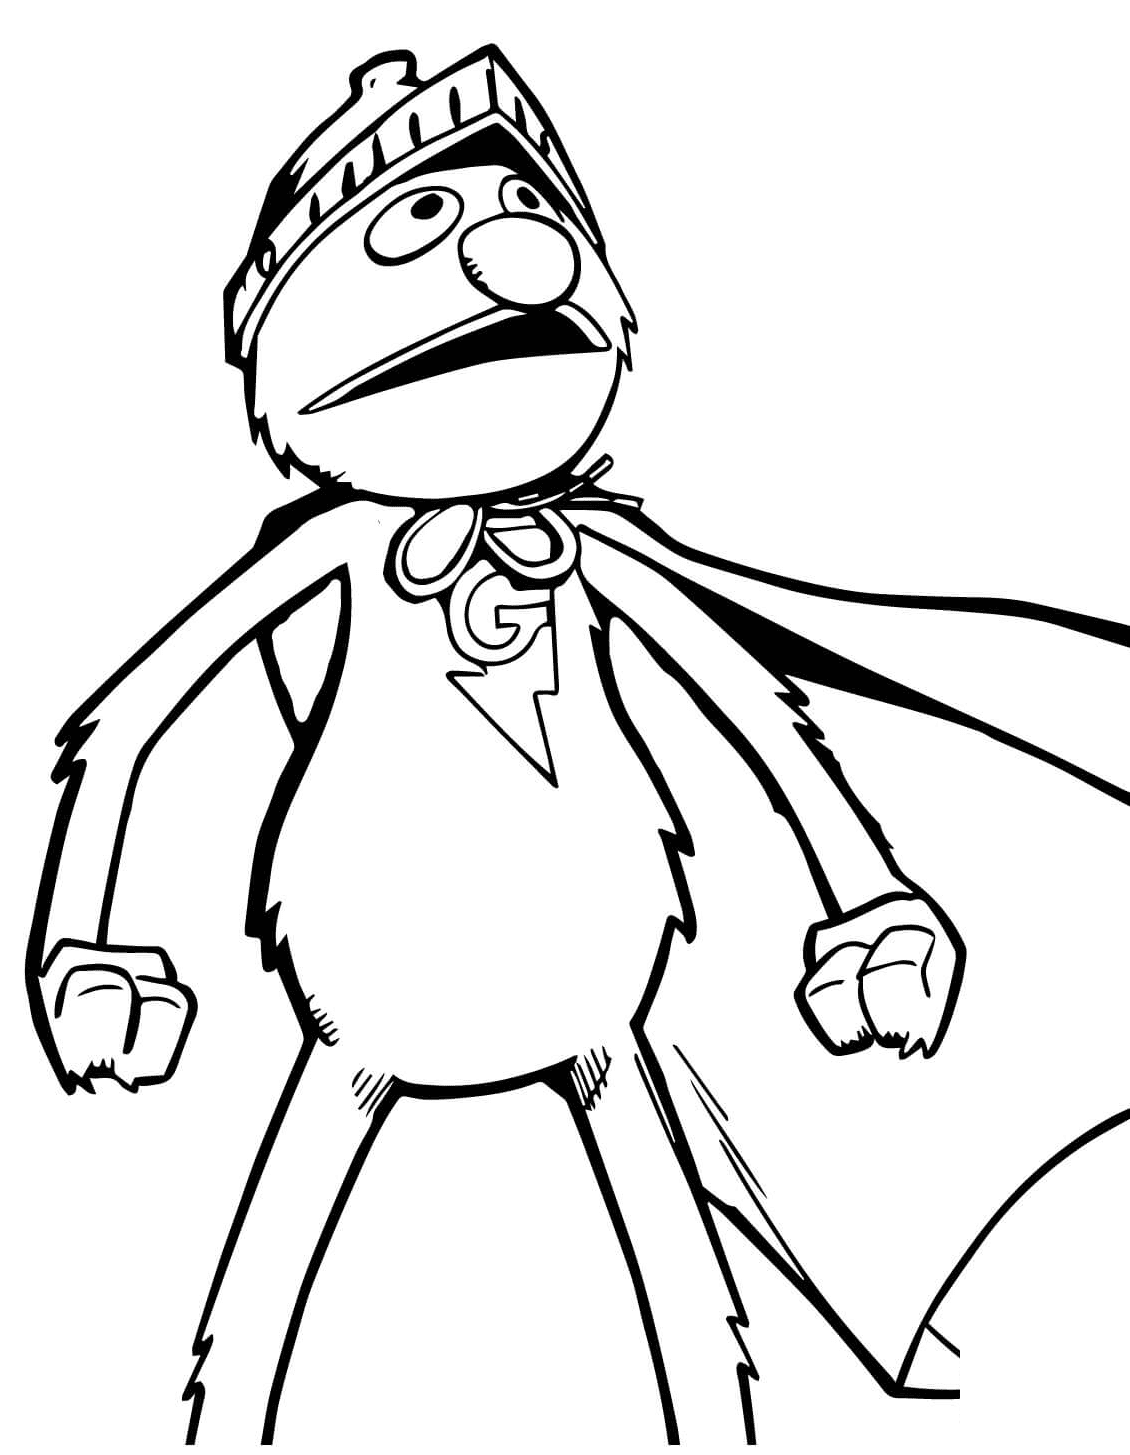 Super Grover Sesame Street Coloring Page